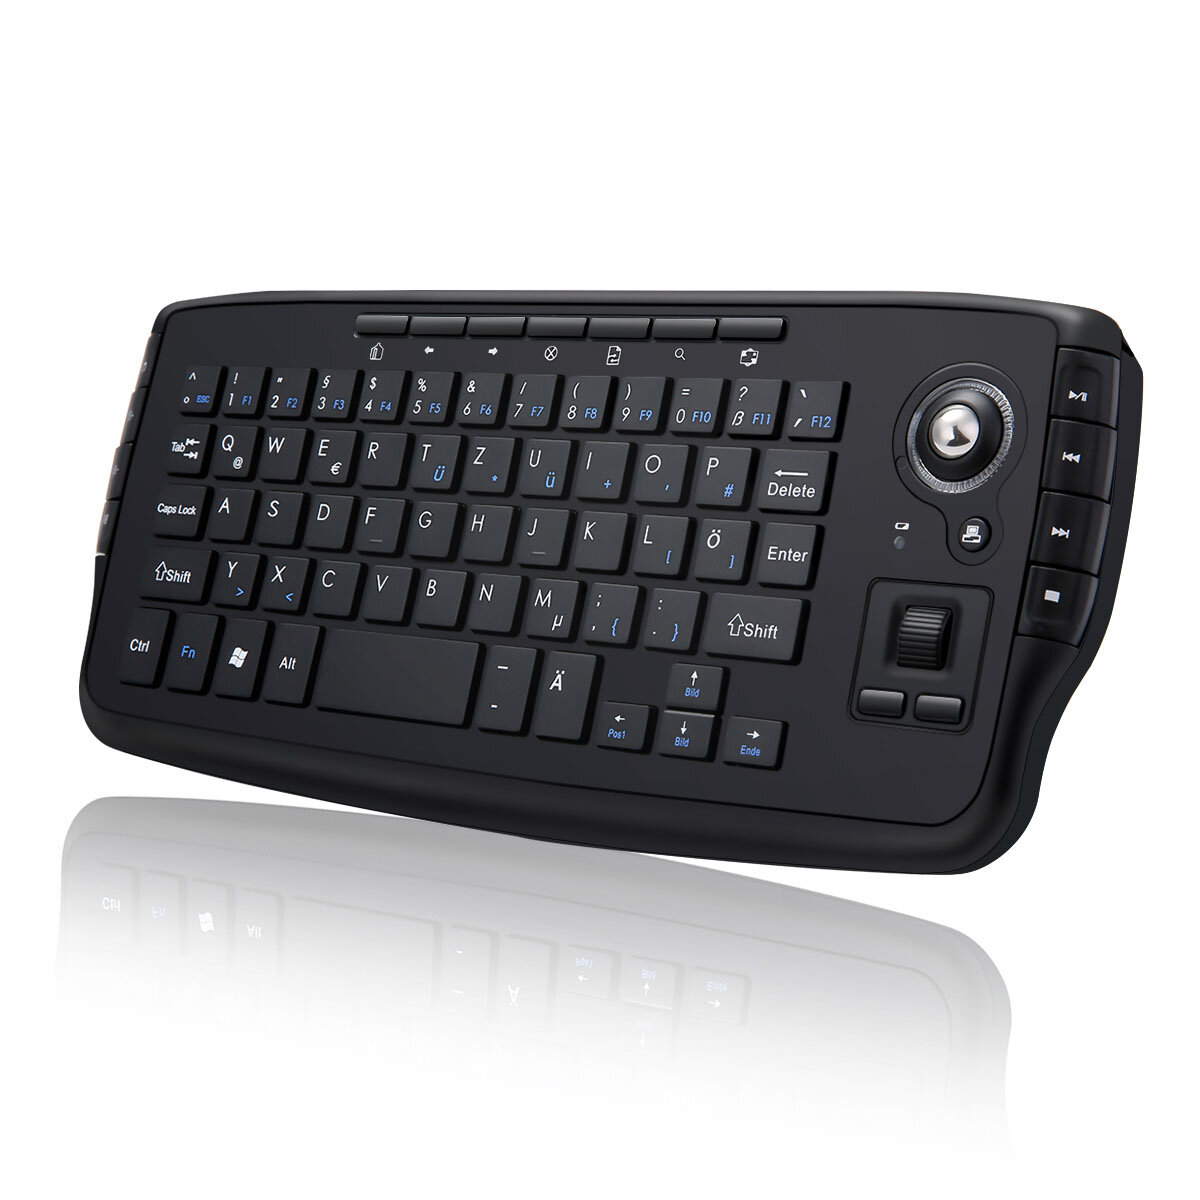 Bestrunner Mini Wireless Air Keyboard 2-In-1 Mouse Scroll Wheel German Keyboard with Optical Trackball for Mini PC Android